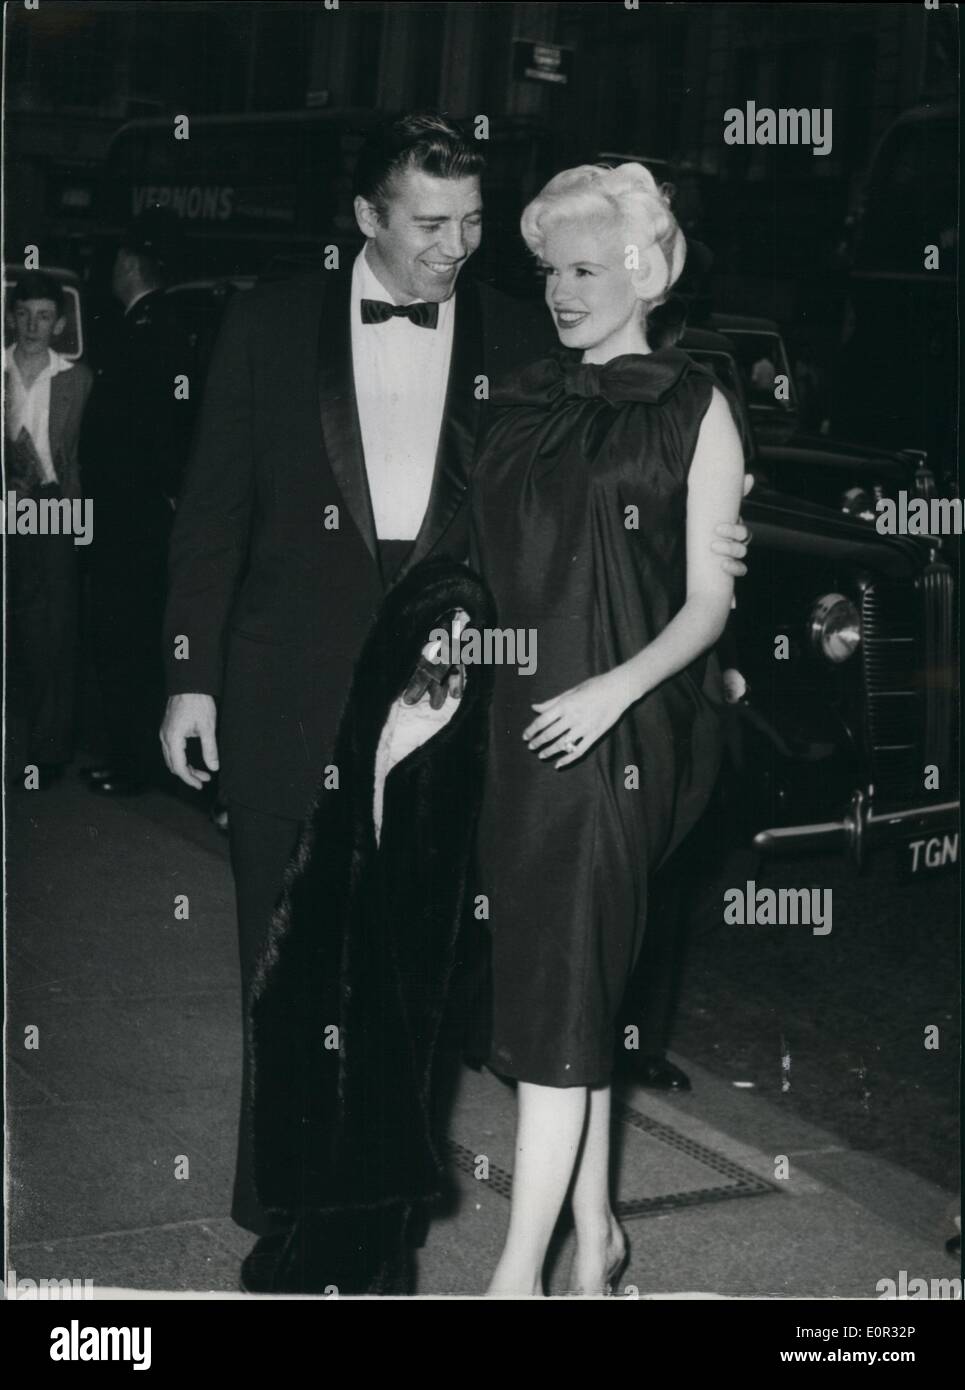 Dec. 00, 1958 - ''(Illegible)'' Mansfield Attends Premiere. s Expecting A Baby: Photo shows Jayne Mansfield, pictured with her Haymarket last night, attend the premiere of the film ''The Battle of the v.l.'' Jayne, who wore a sack-style dress, yesterday announced that she is expecting a baby in December. Stock Photo